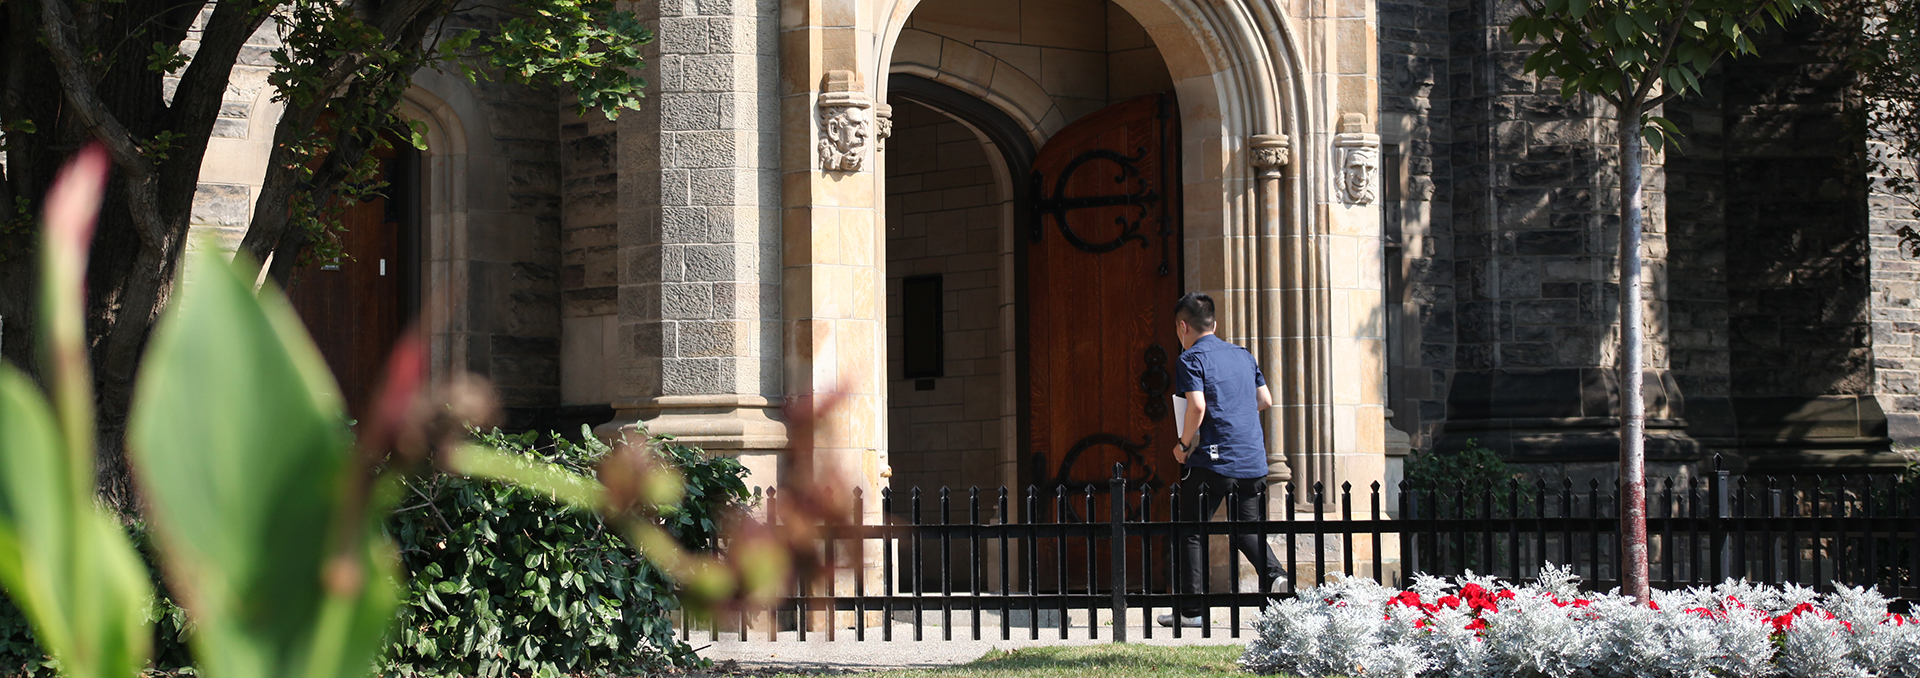 Student walking through front entrance of the main Trinity building